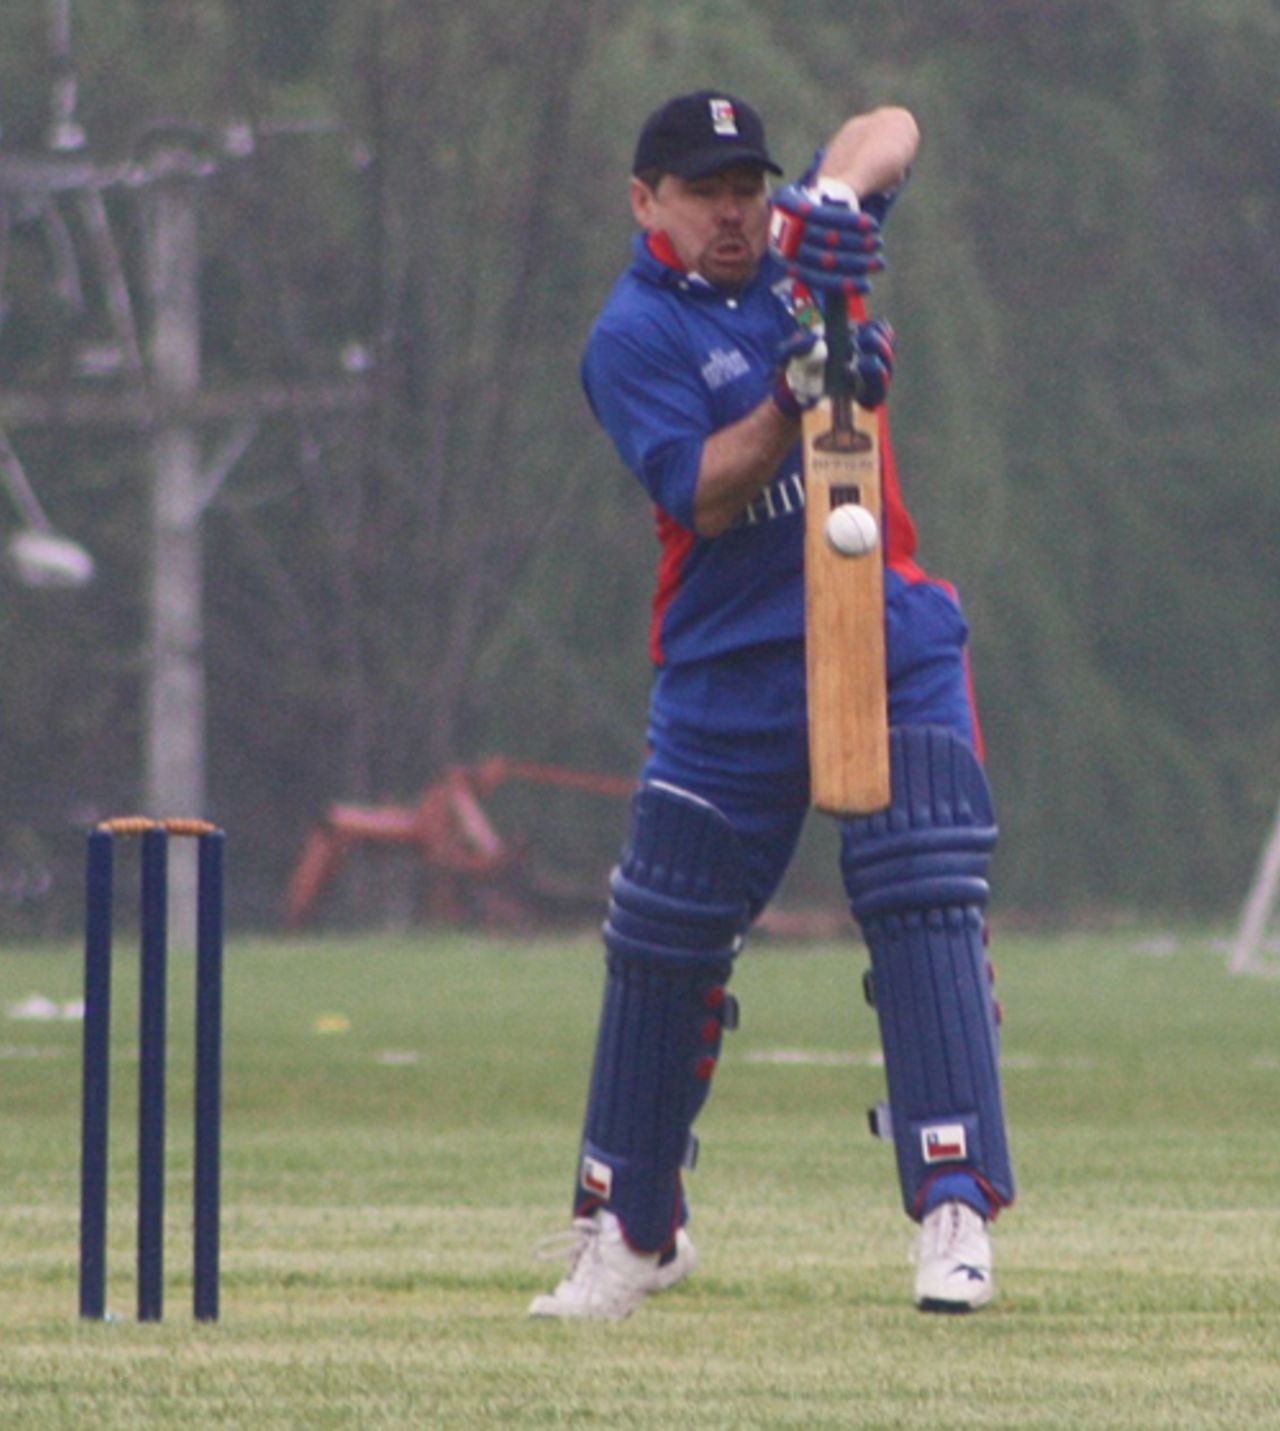 Chile's Ian Walker defends as rain begins to fall, ICC Americas Division 3, Santiago, October 10, 2009